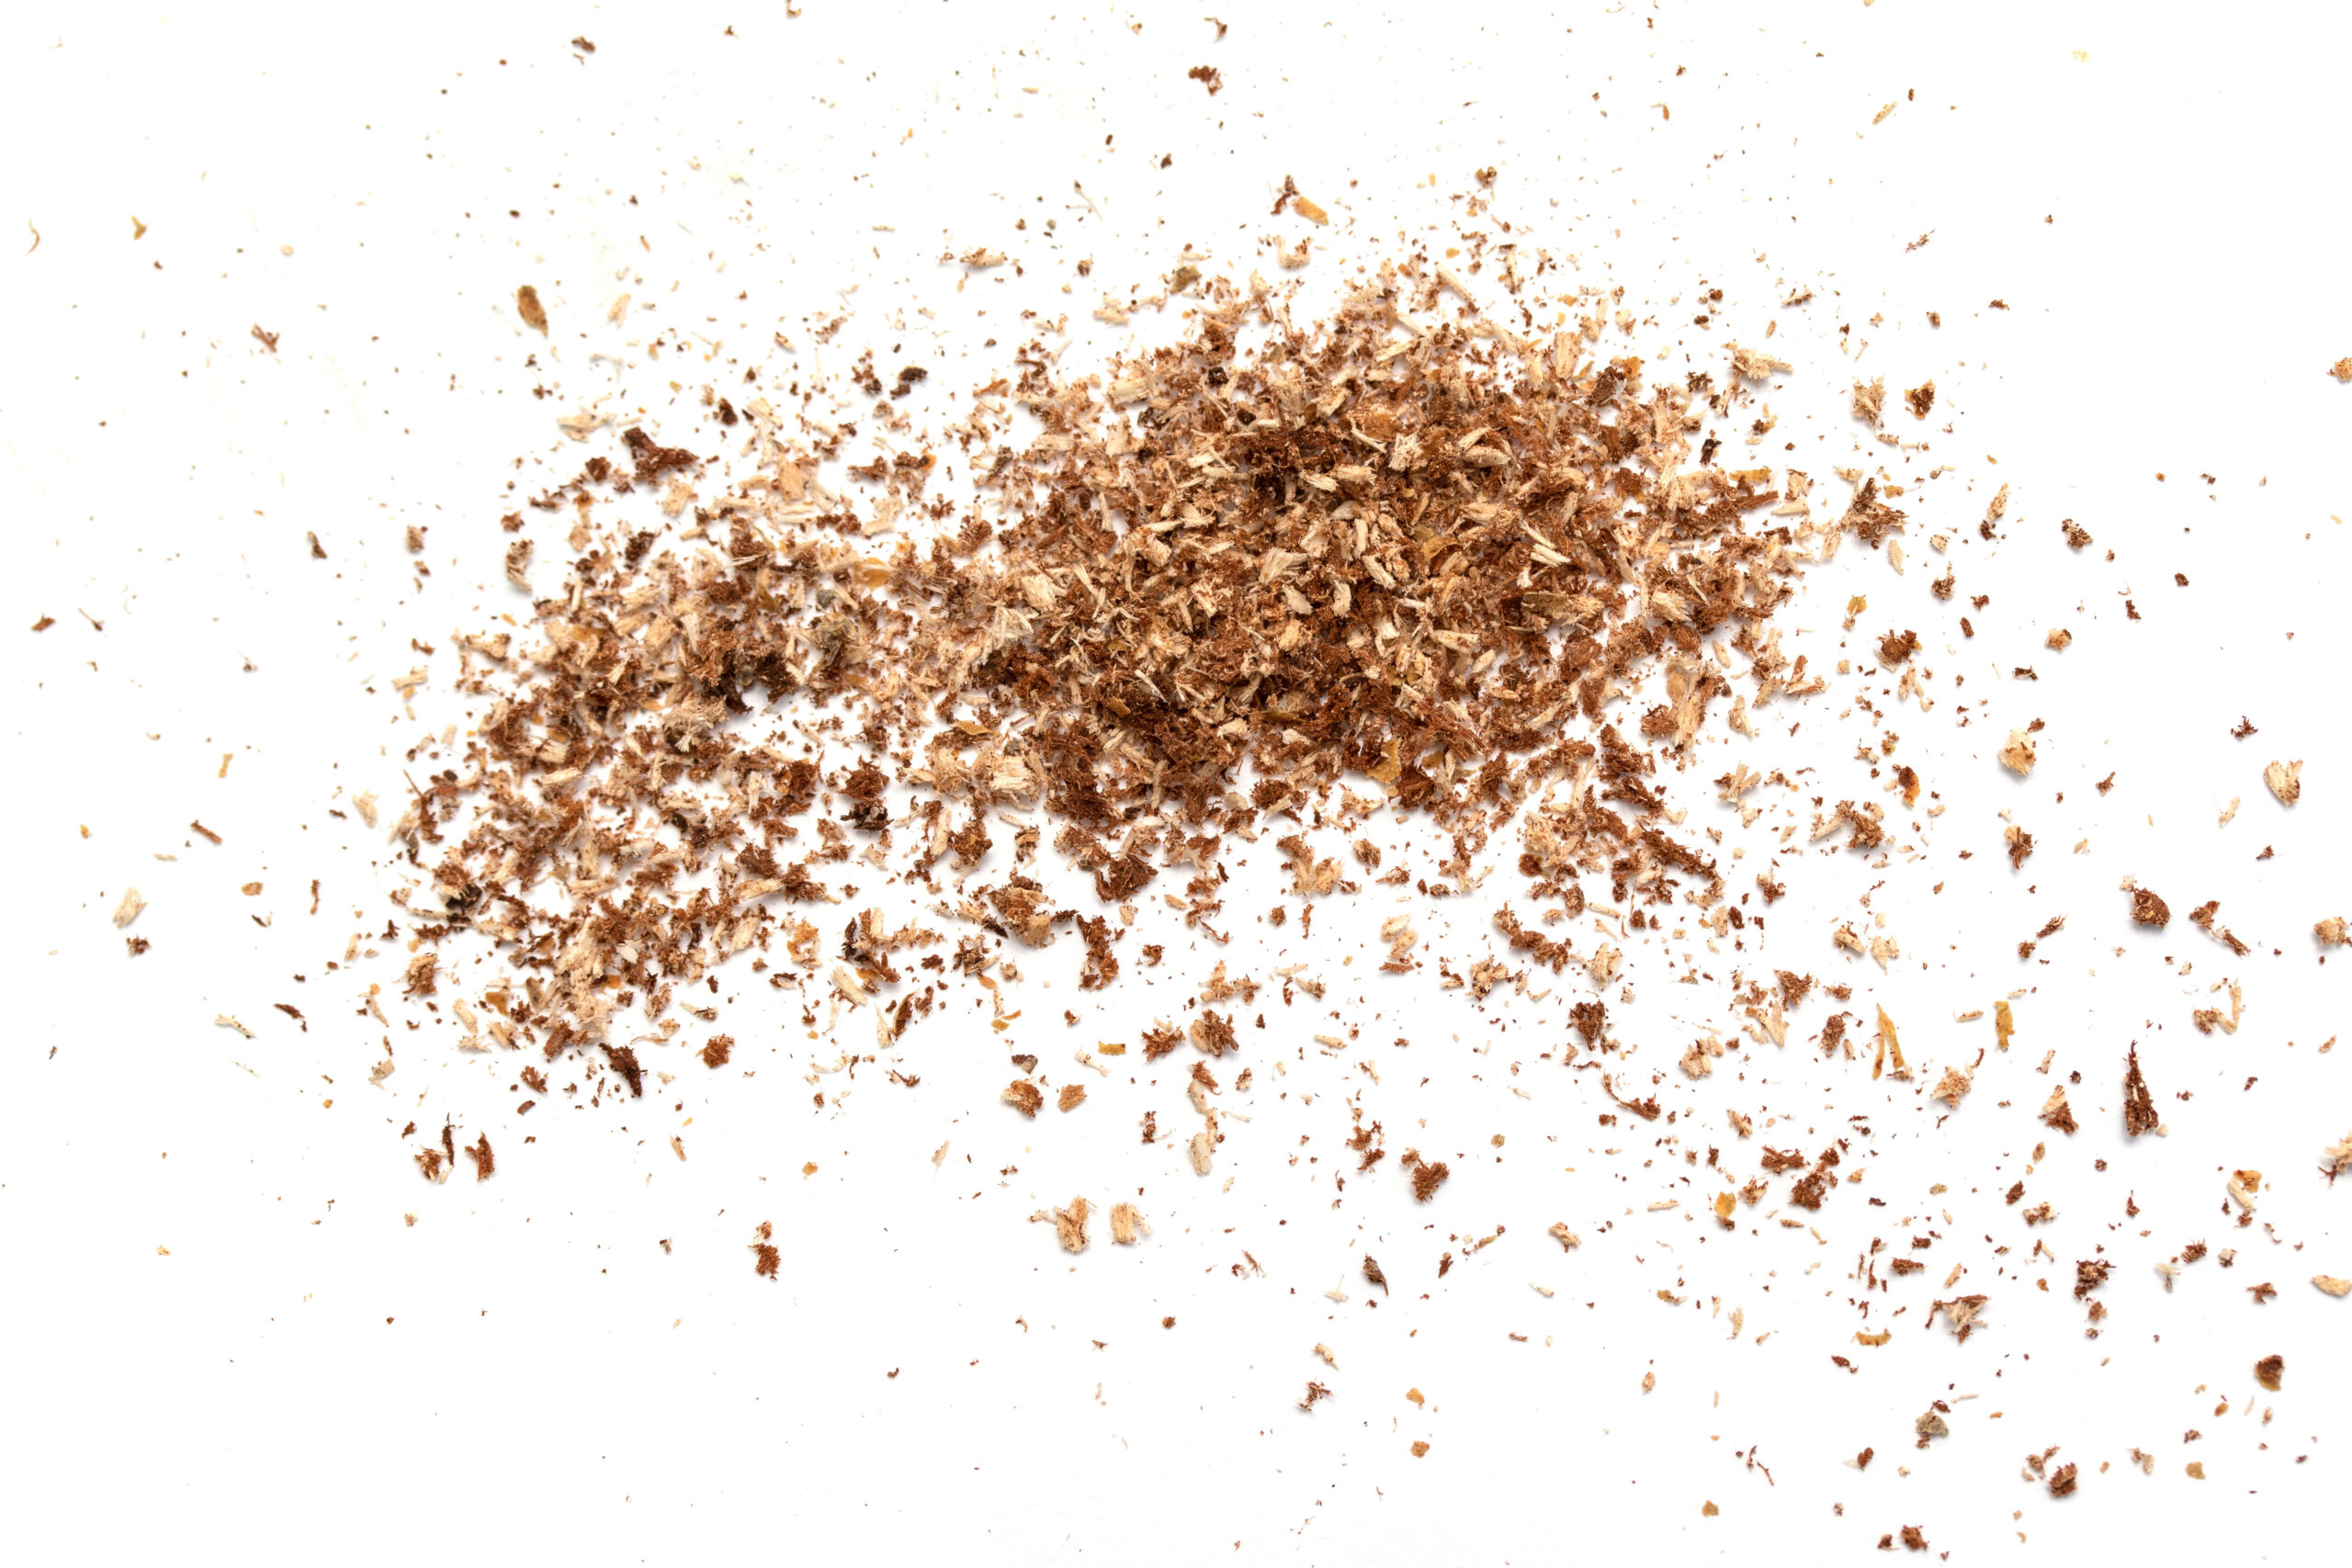 Small wooden shavings of sawdust